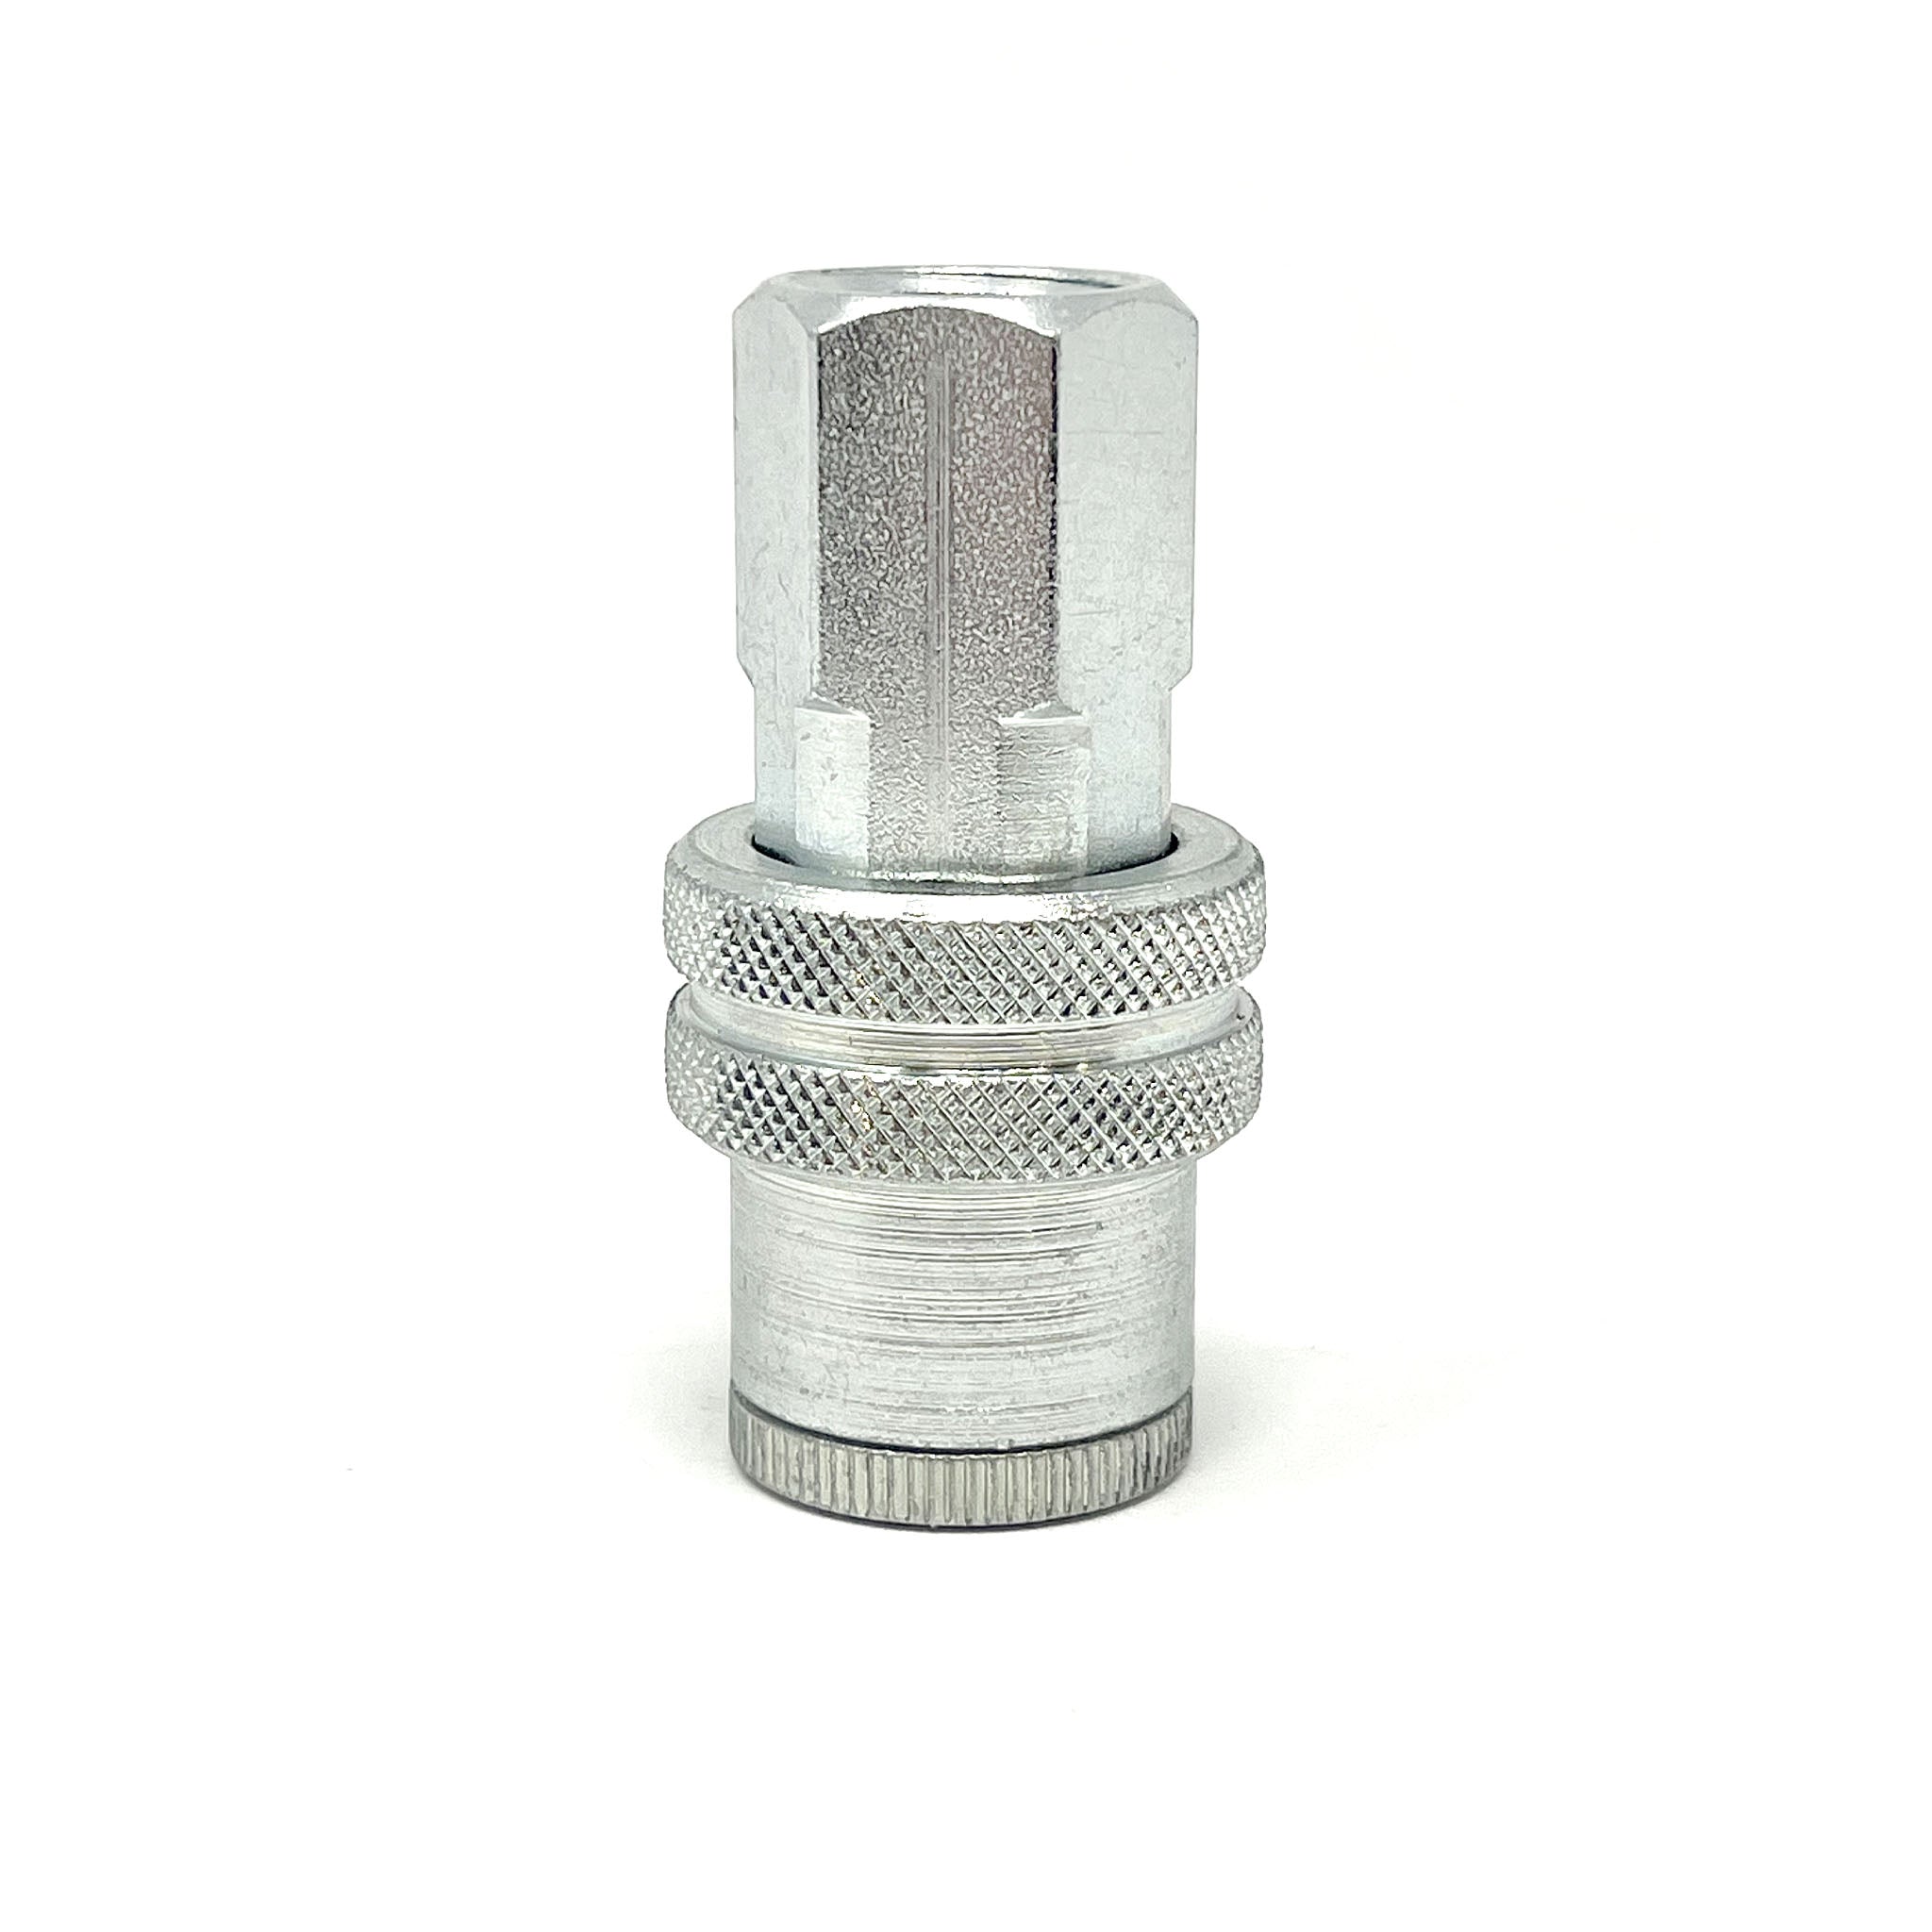 Air Coupler Fitting - G-Style, 1/2" FNPT - Sleeve Ring